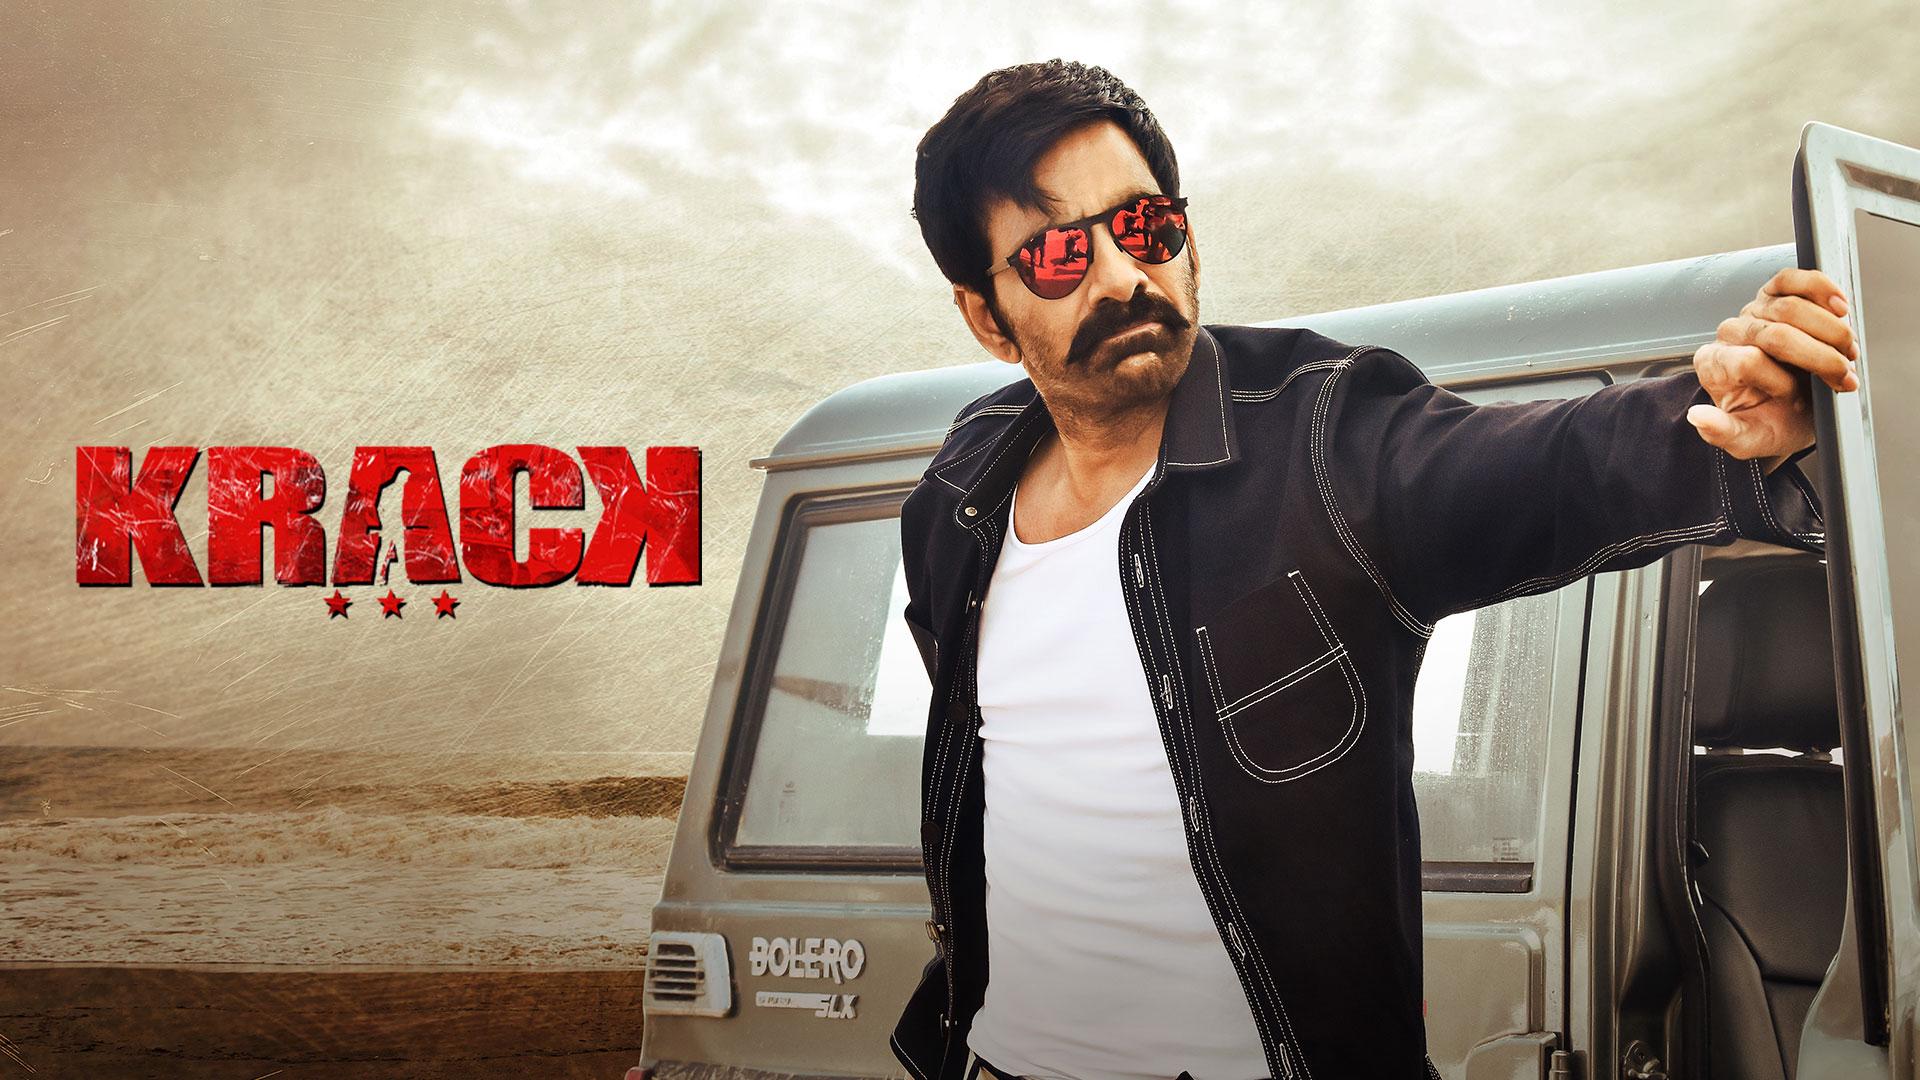 Watch Krack Full Movie Online in HD Quality | Download Now